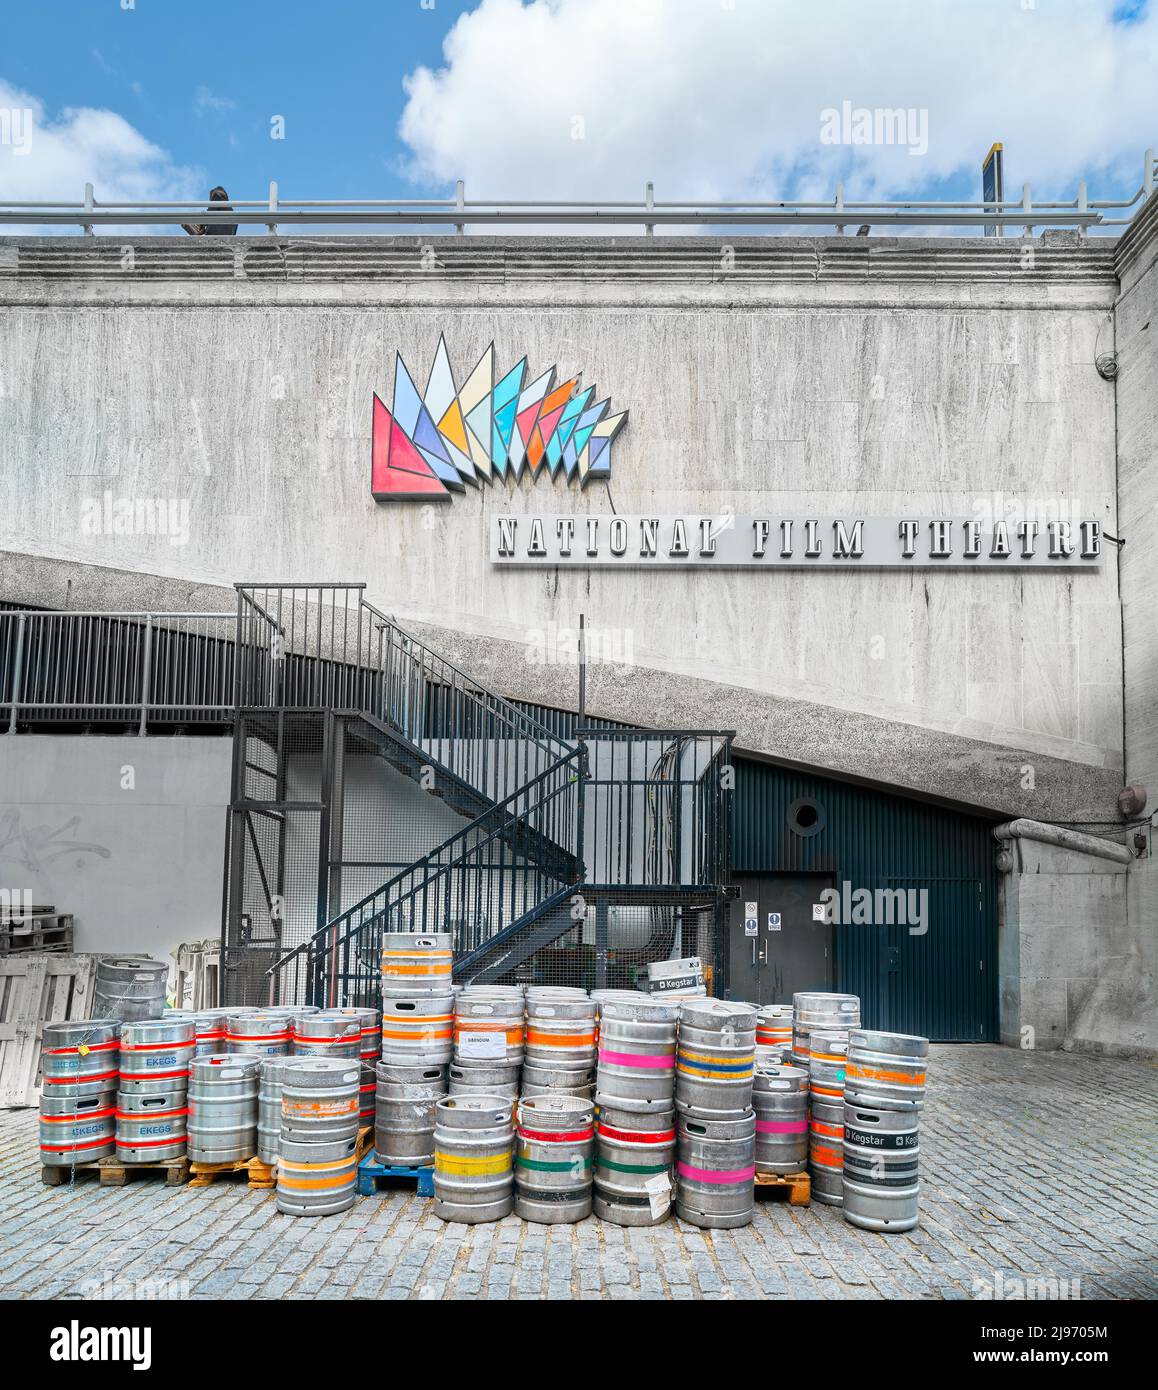 Empty keg barrels of beer outside the BFI (british film institute) National Film theatre, South Bank, London, England. Stock Photo